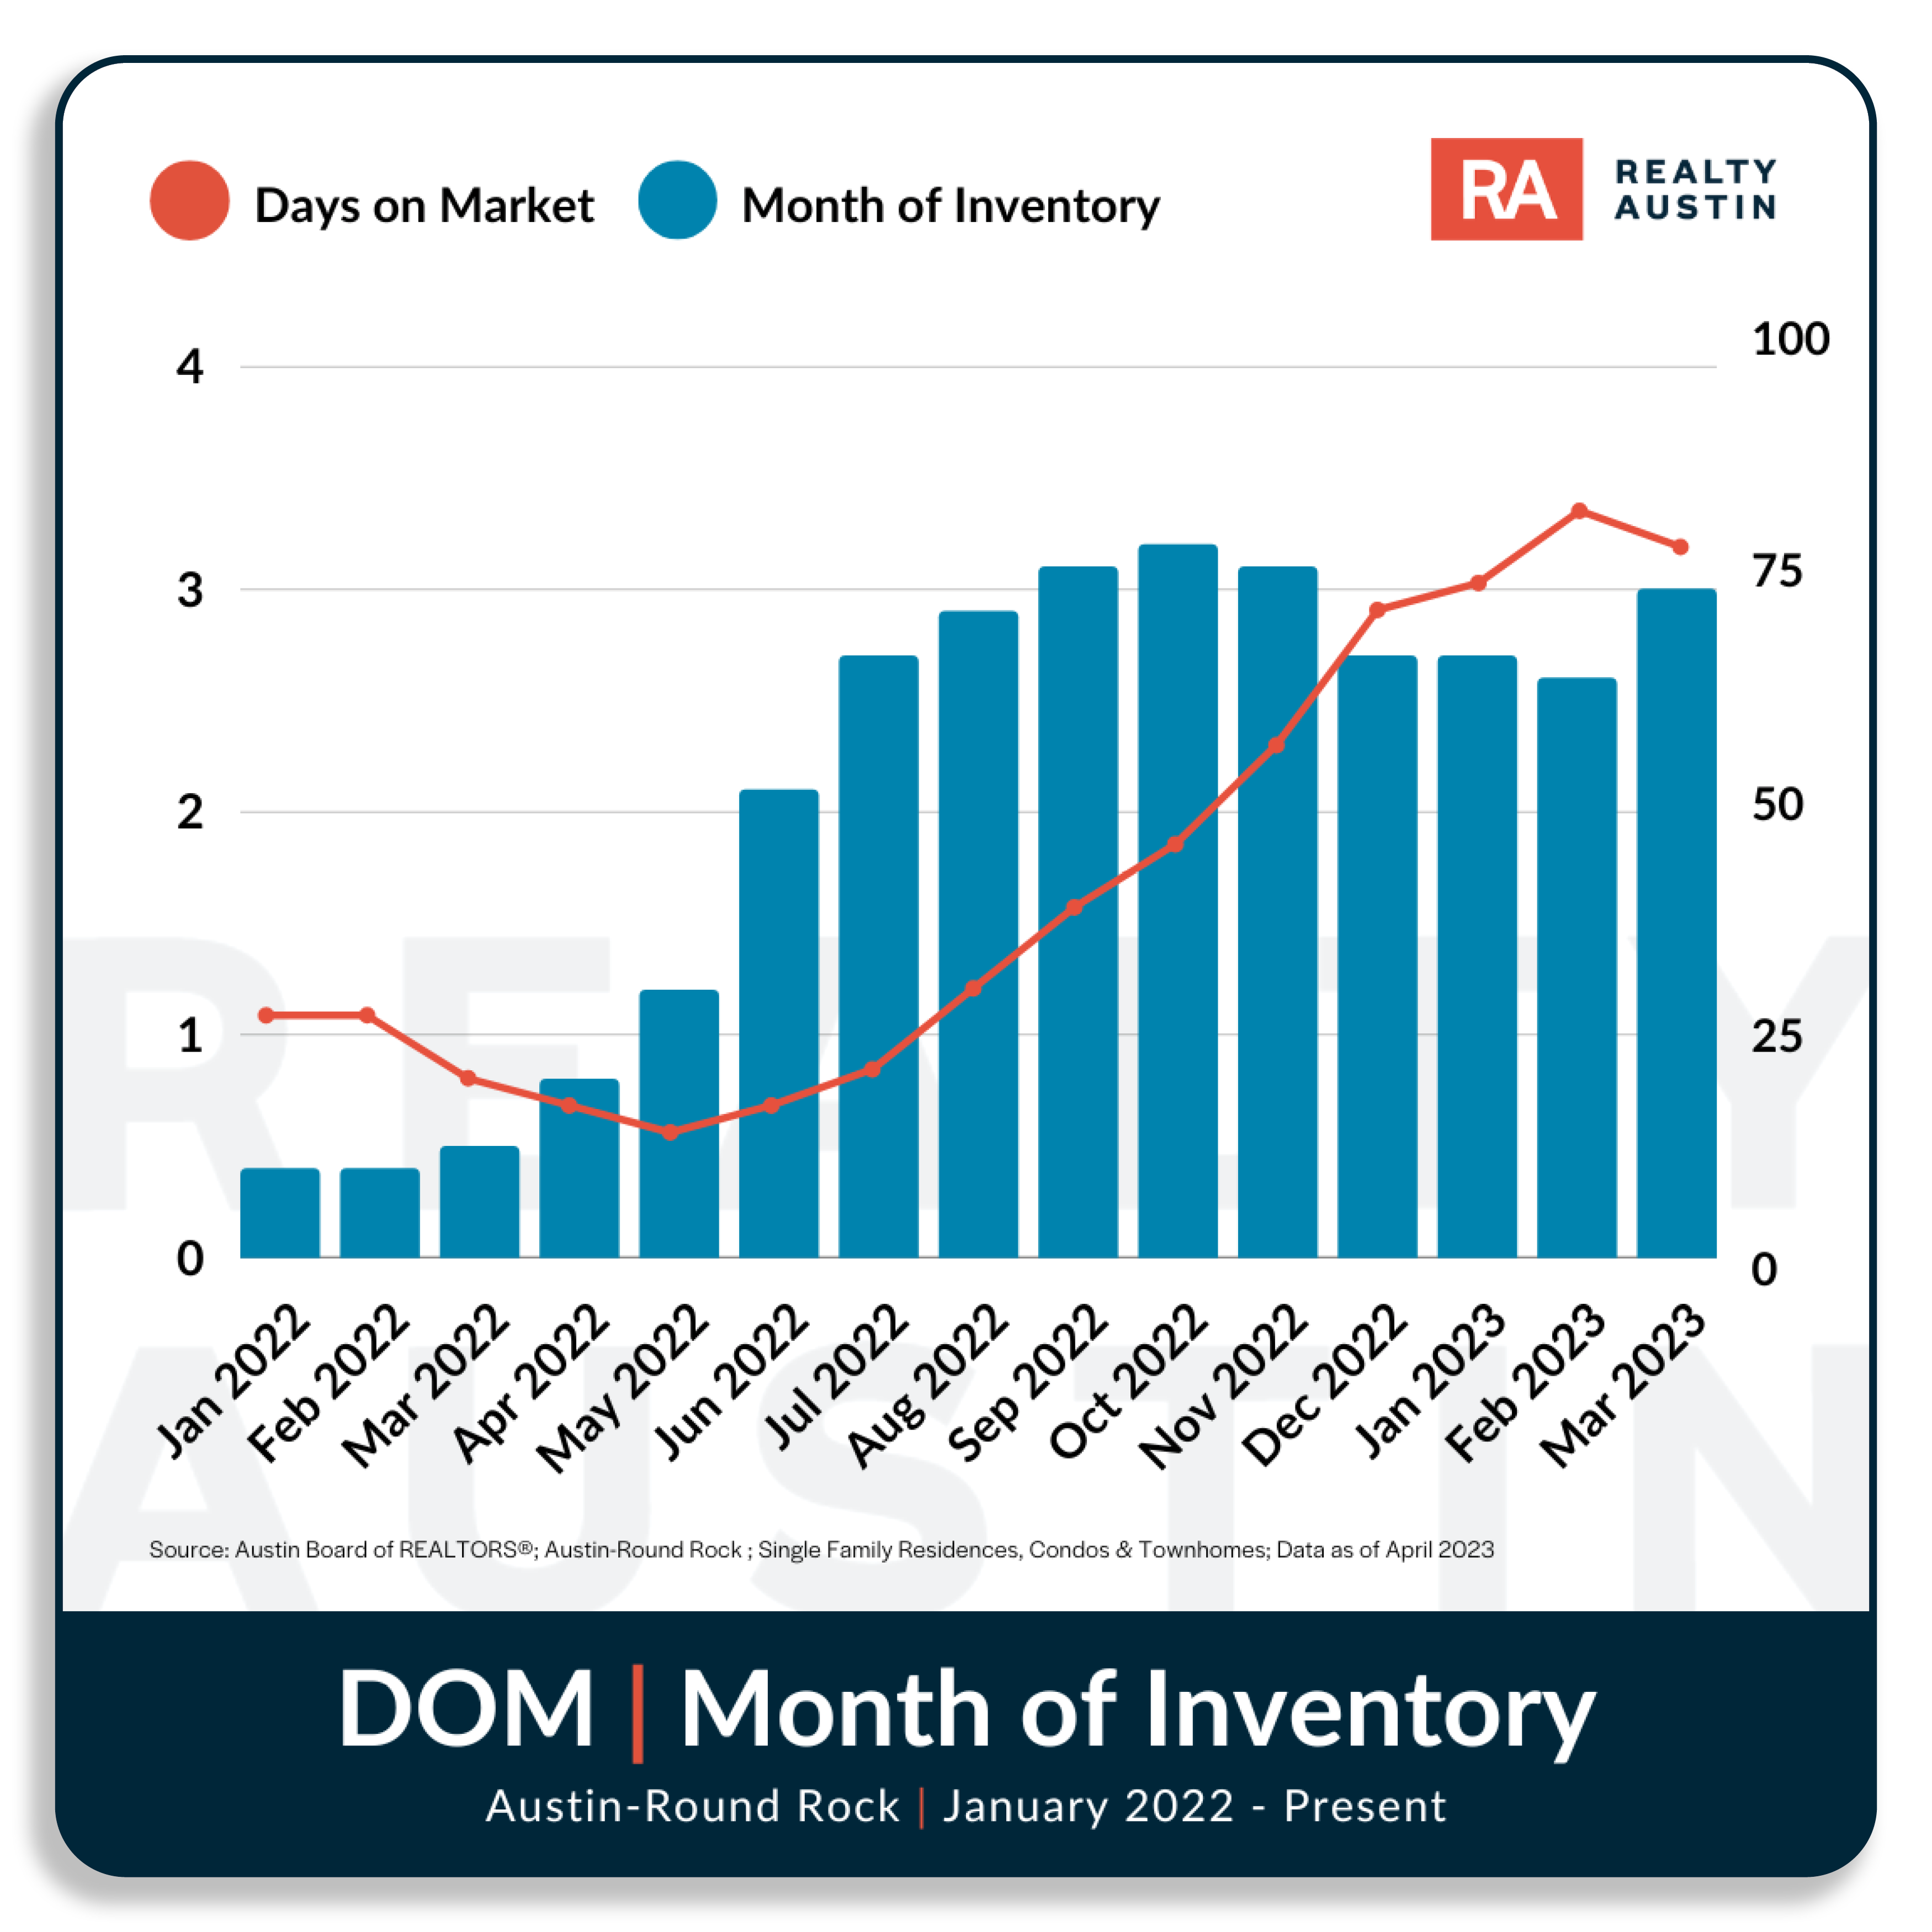 Days on Market and Month of inventory.